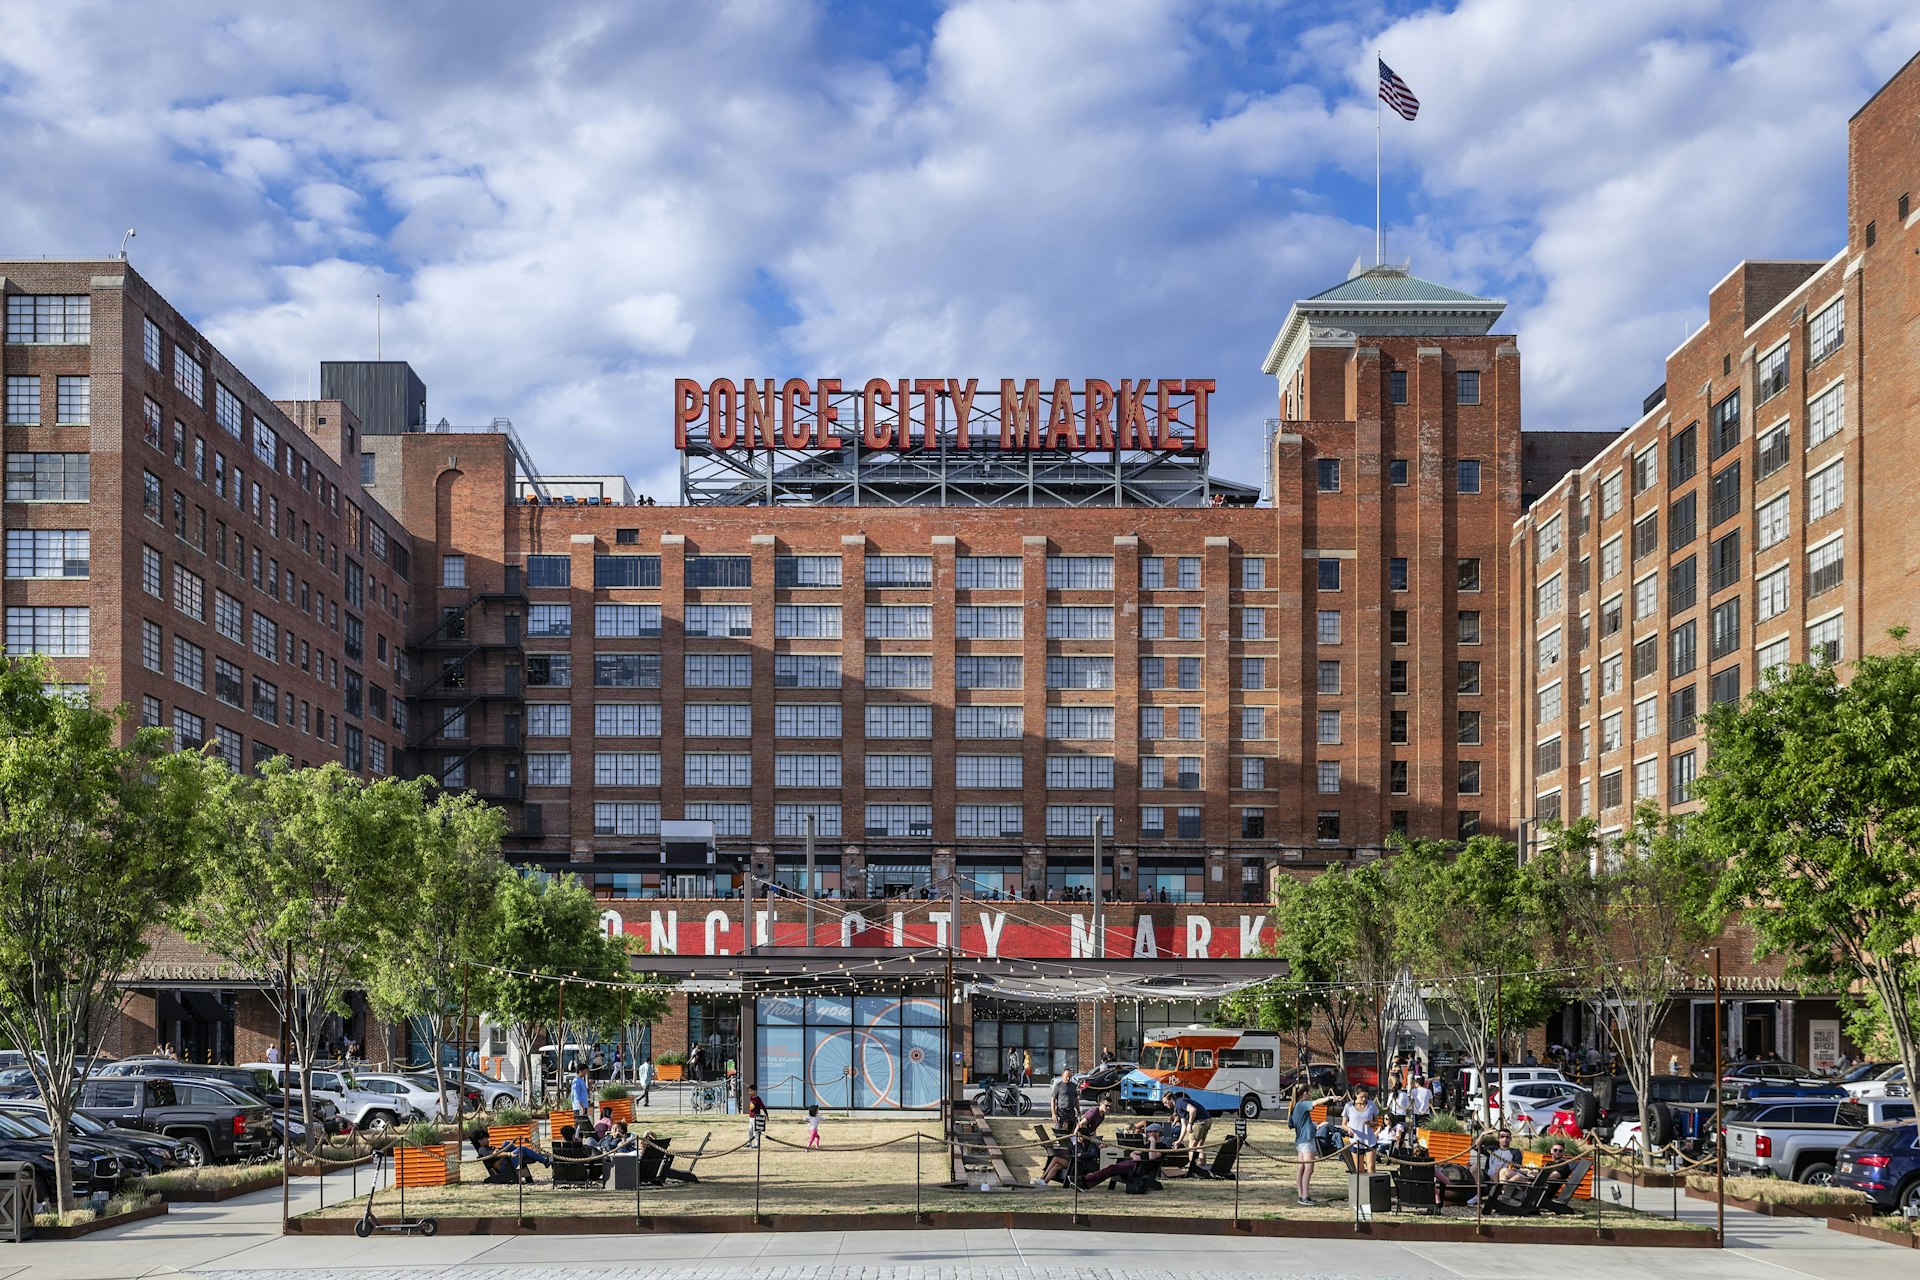 Exterior shot of the brick building of the Ponce city Market. There is a large sign of the market's name at the top of the building. In front there are chairs and tables where people are sitting. 